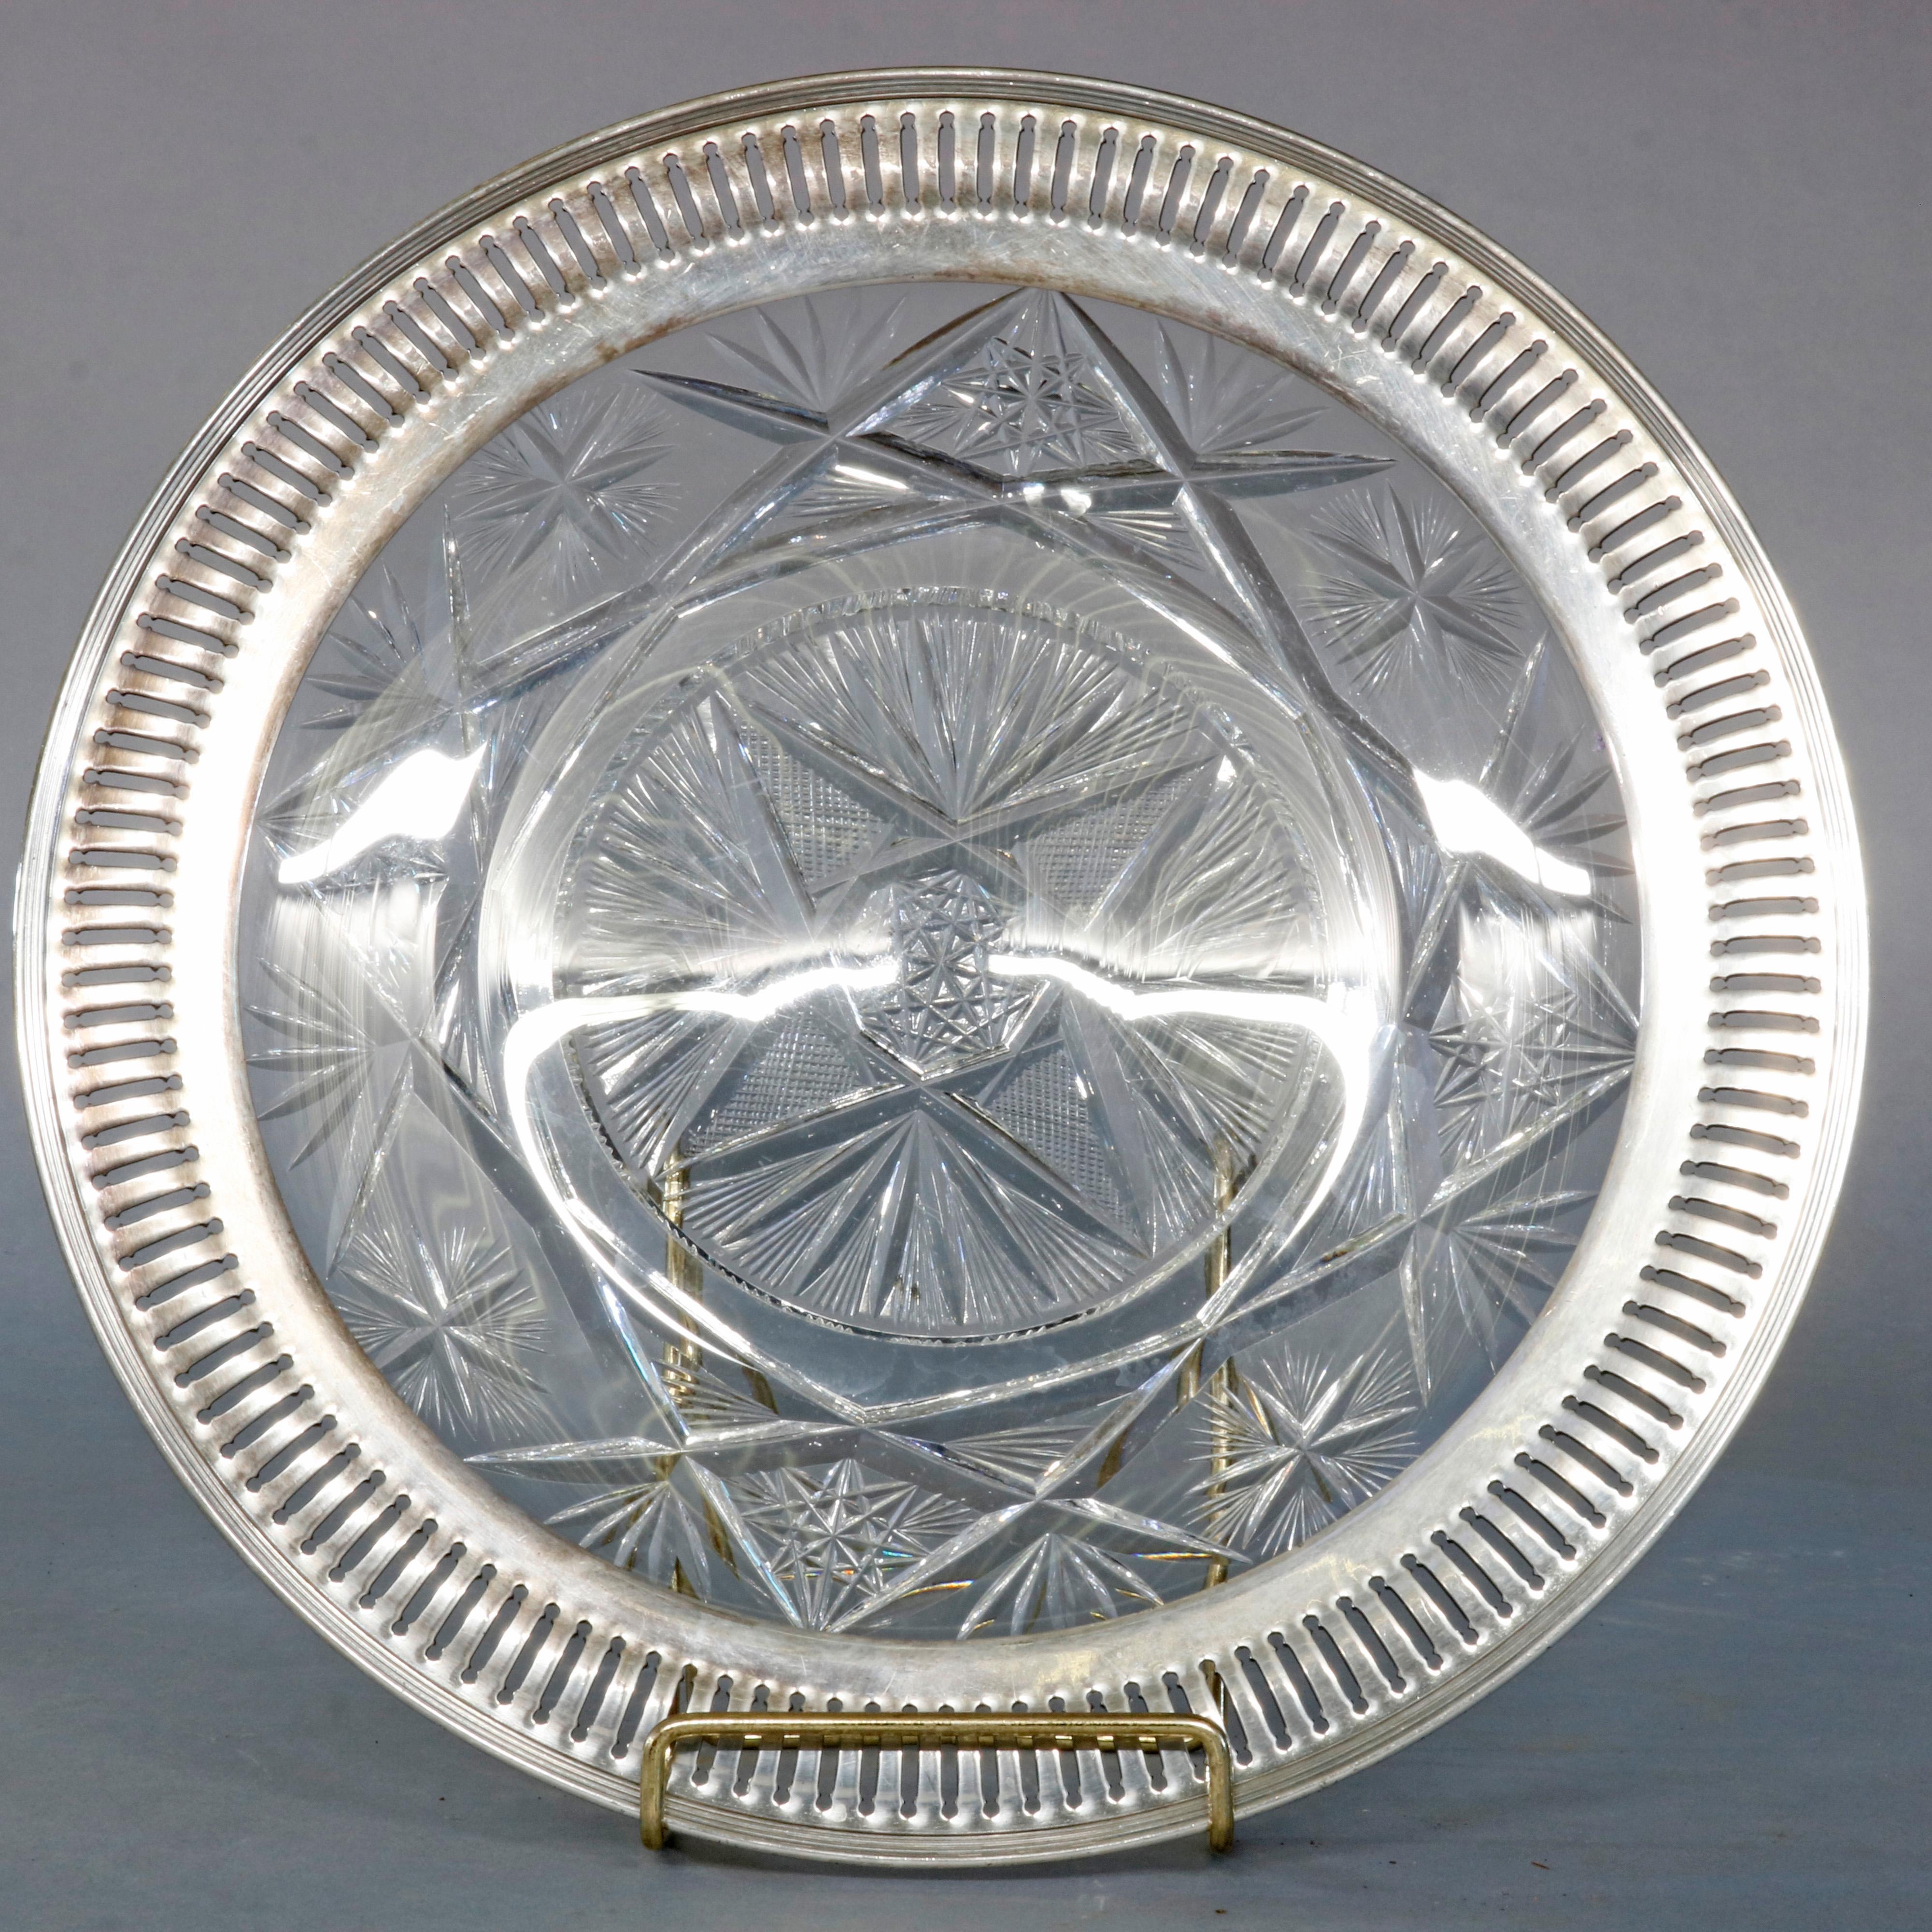 A vintage serving tray offers reeded sterling silver rim surrounding cut glass base with star pattern, circa 1940

Measures: 1